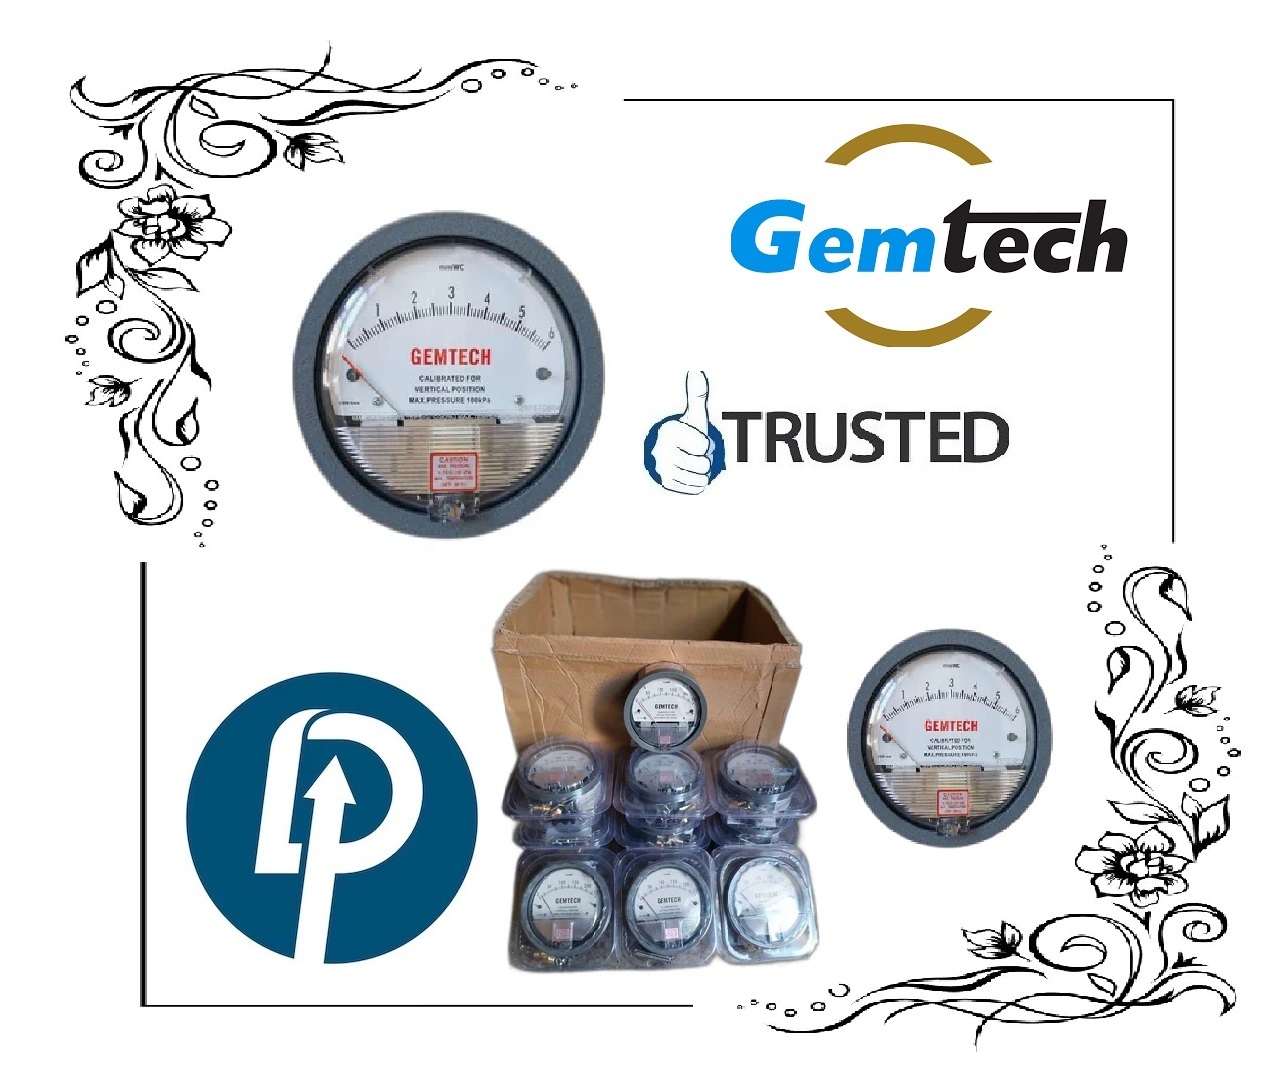 GEMTECH Series G2000-250 MM Differential Pressure Gauges by Range:0 to 250 MM WC